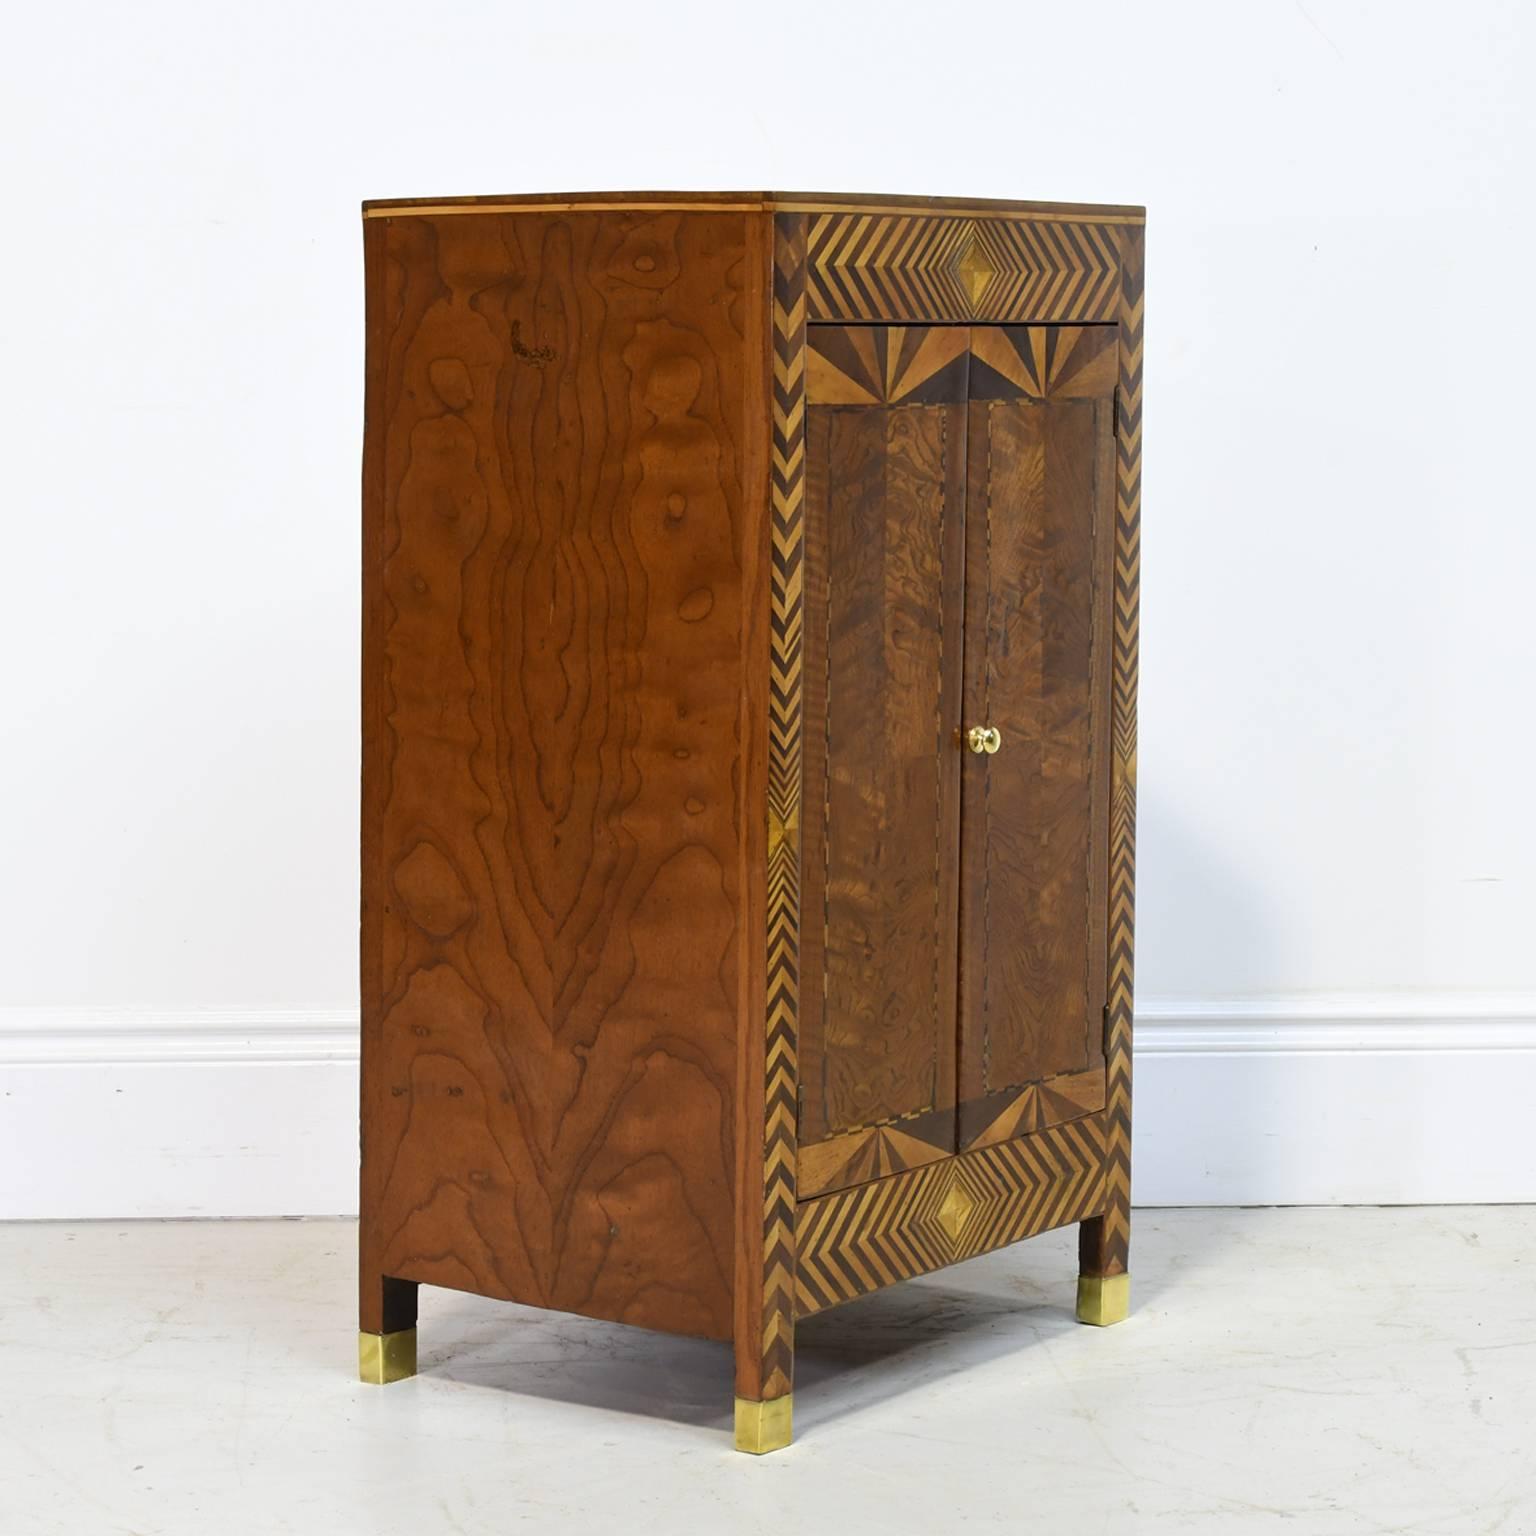 20th Century American Art Deco Cabinet with Marquetry Inlays, circa 1920s